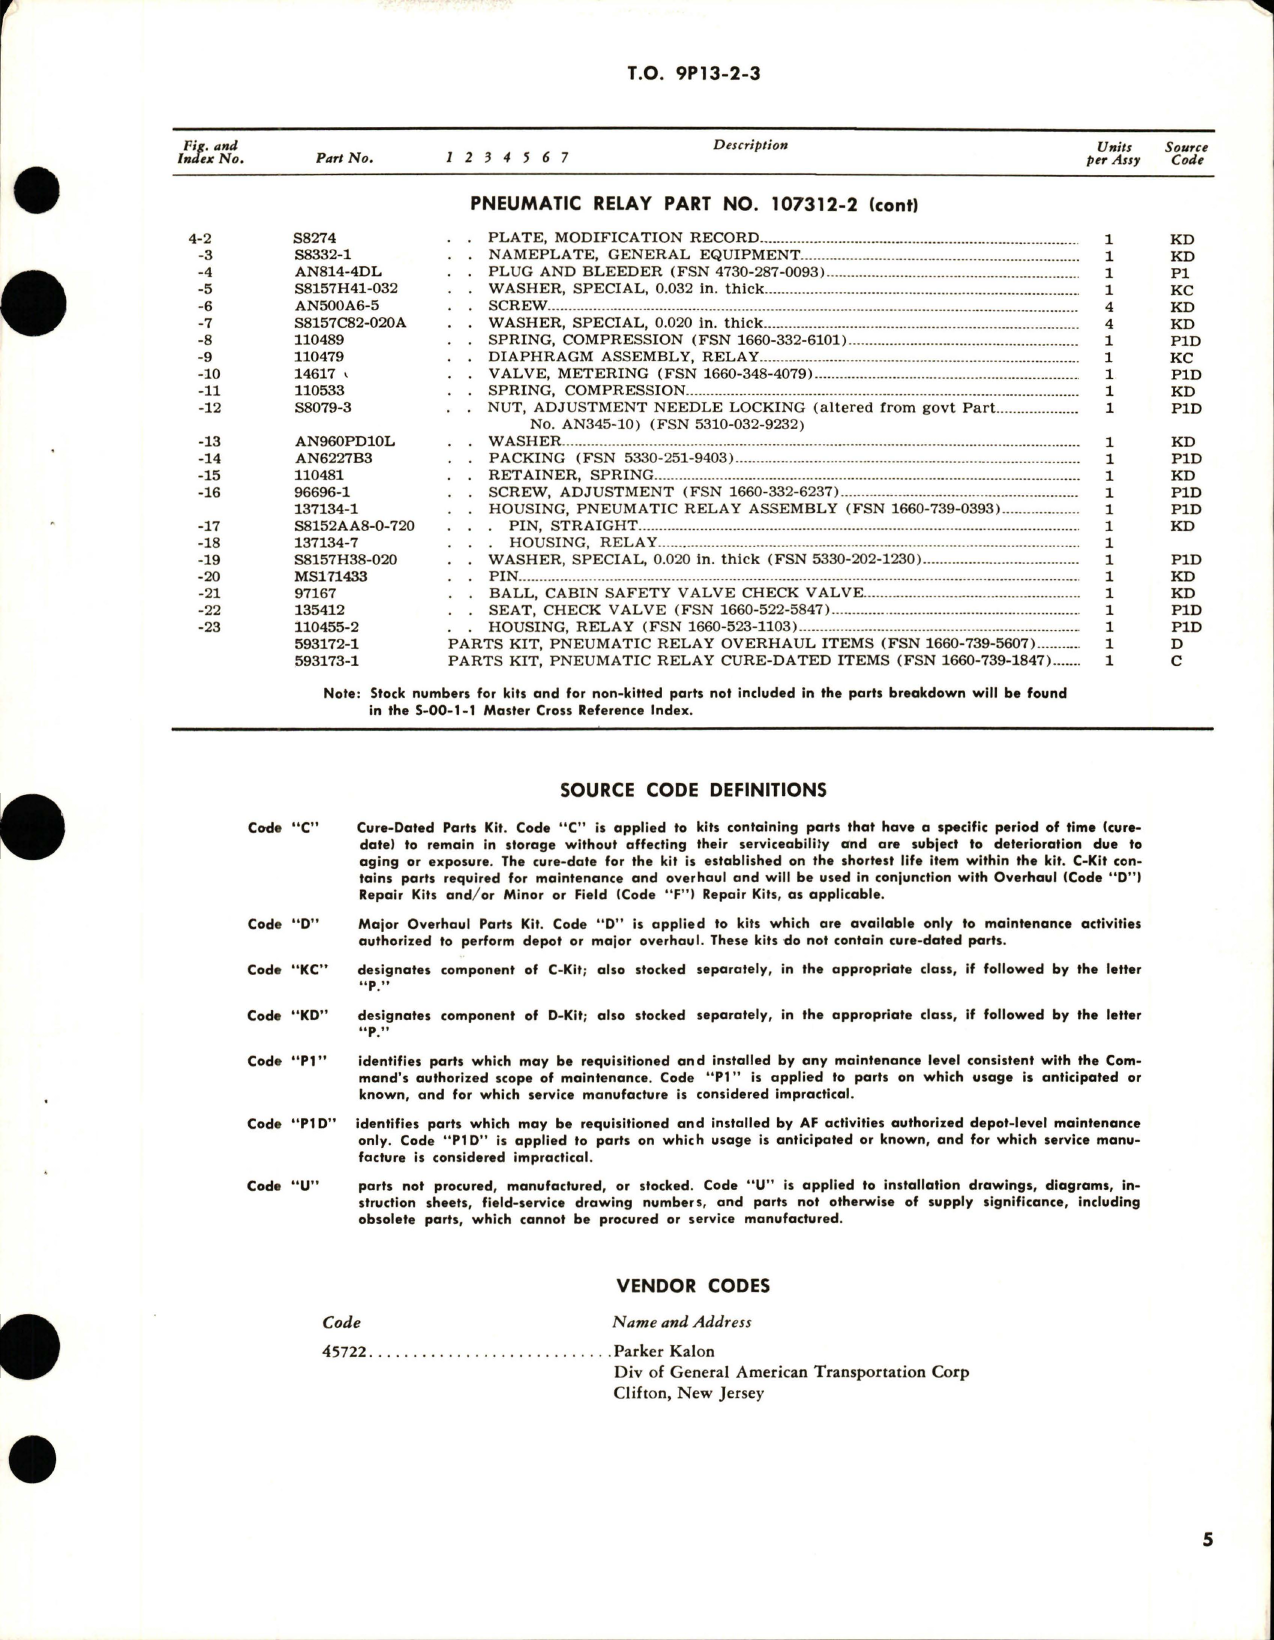 Sample page 5 from AirCorps Library document: Overhaul with Parts Breakdown for Pneumatic Relay - Part 107312-2